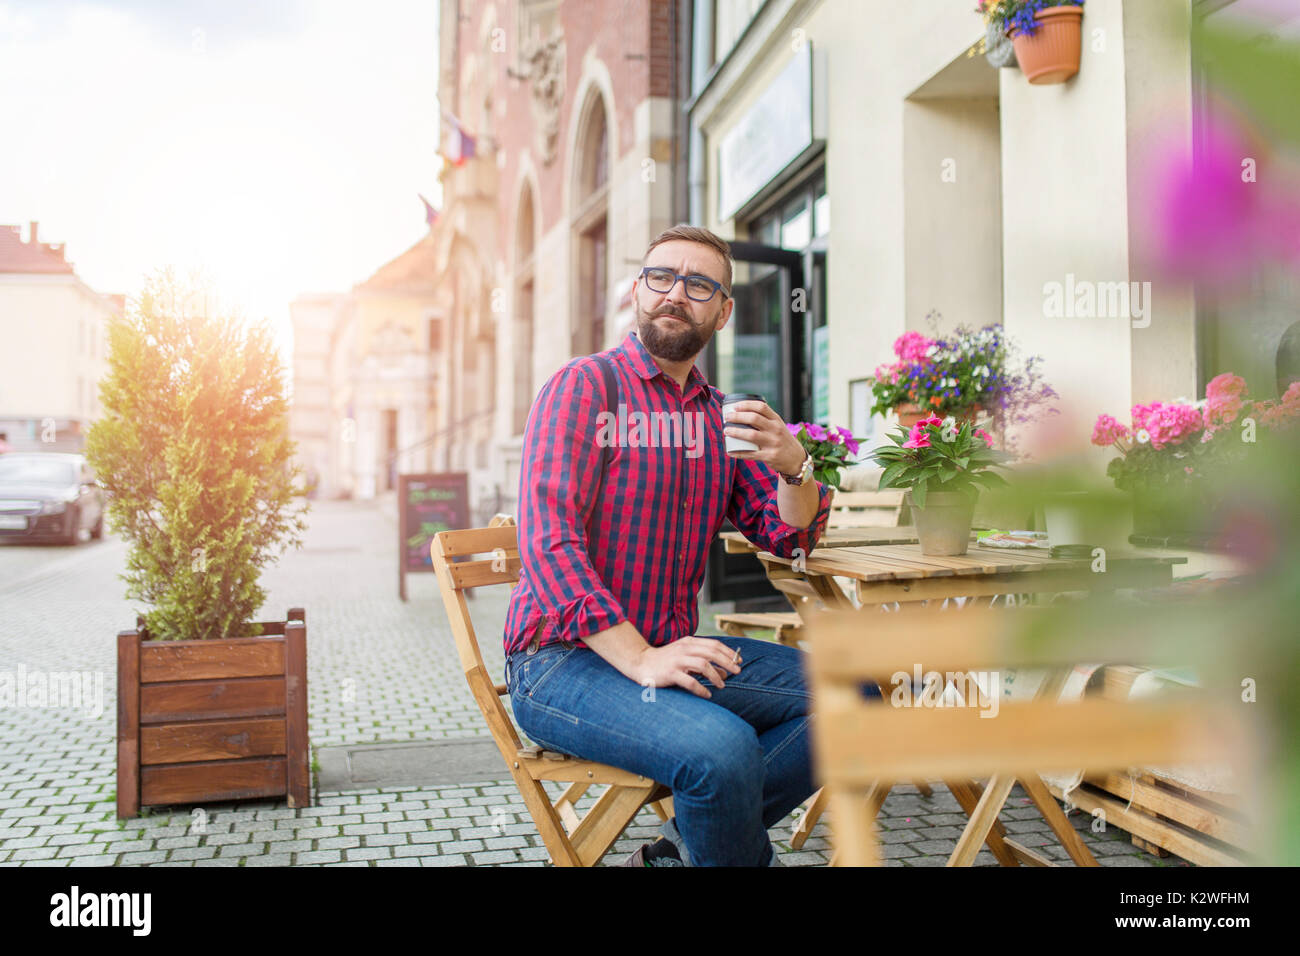 Man sitting in cafe garden and drinking takeaway coffee Stock Photo